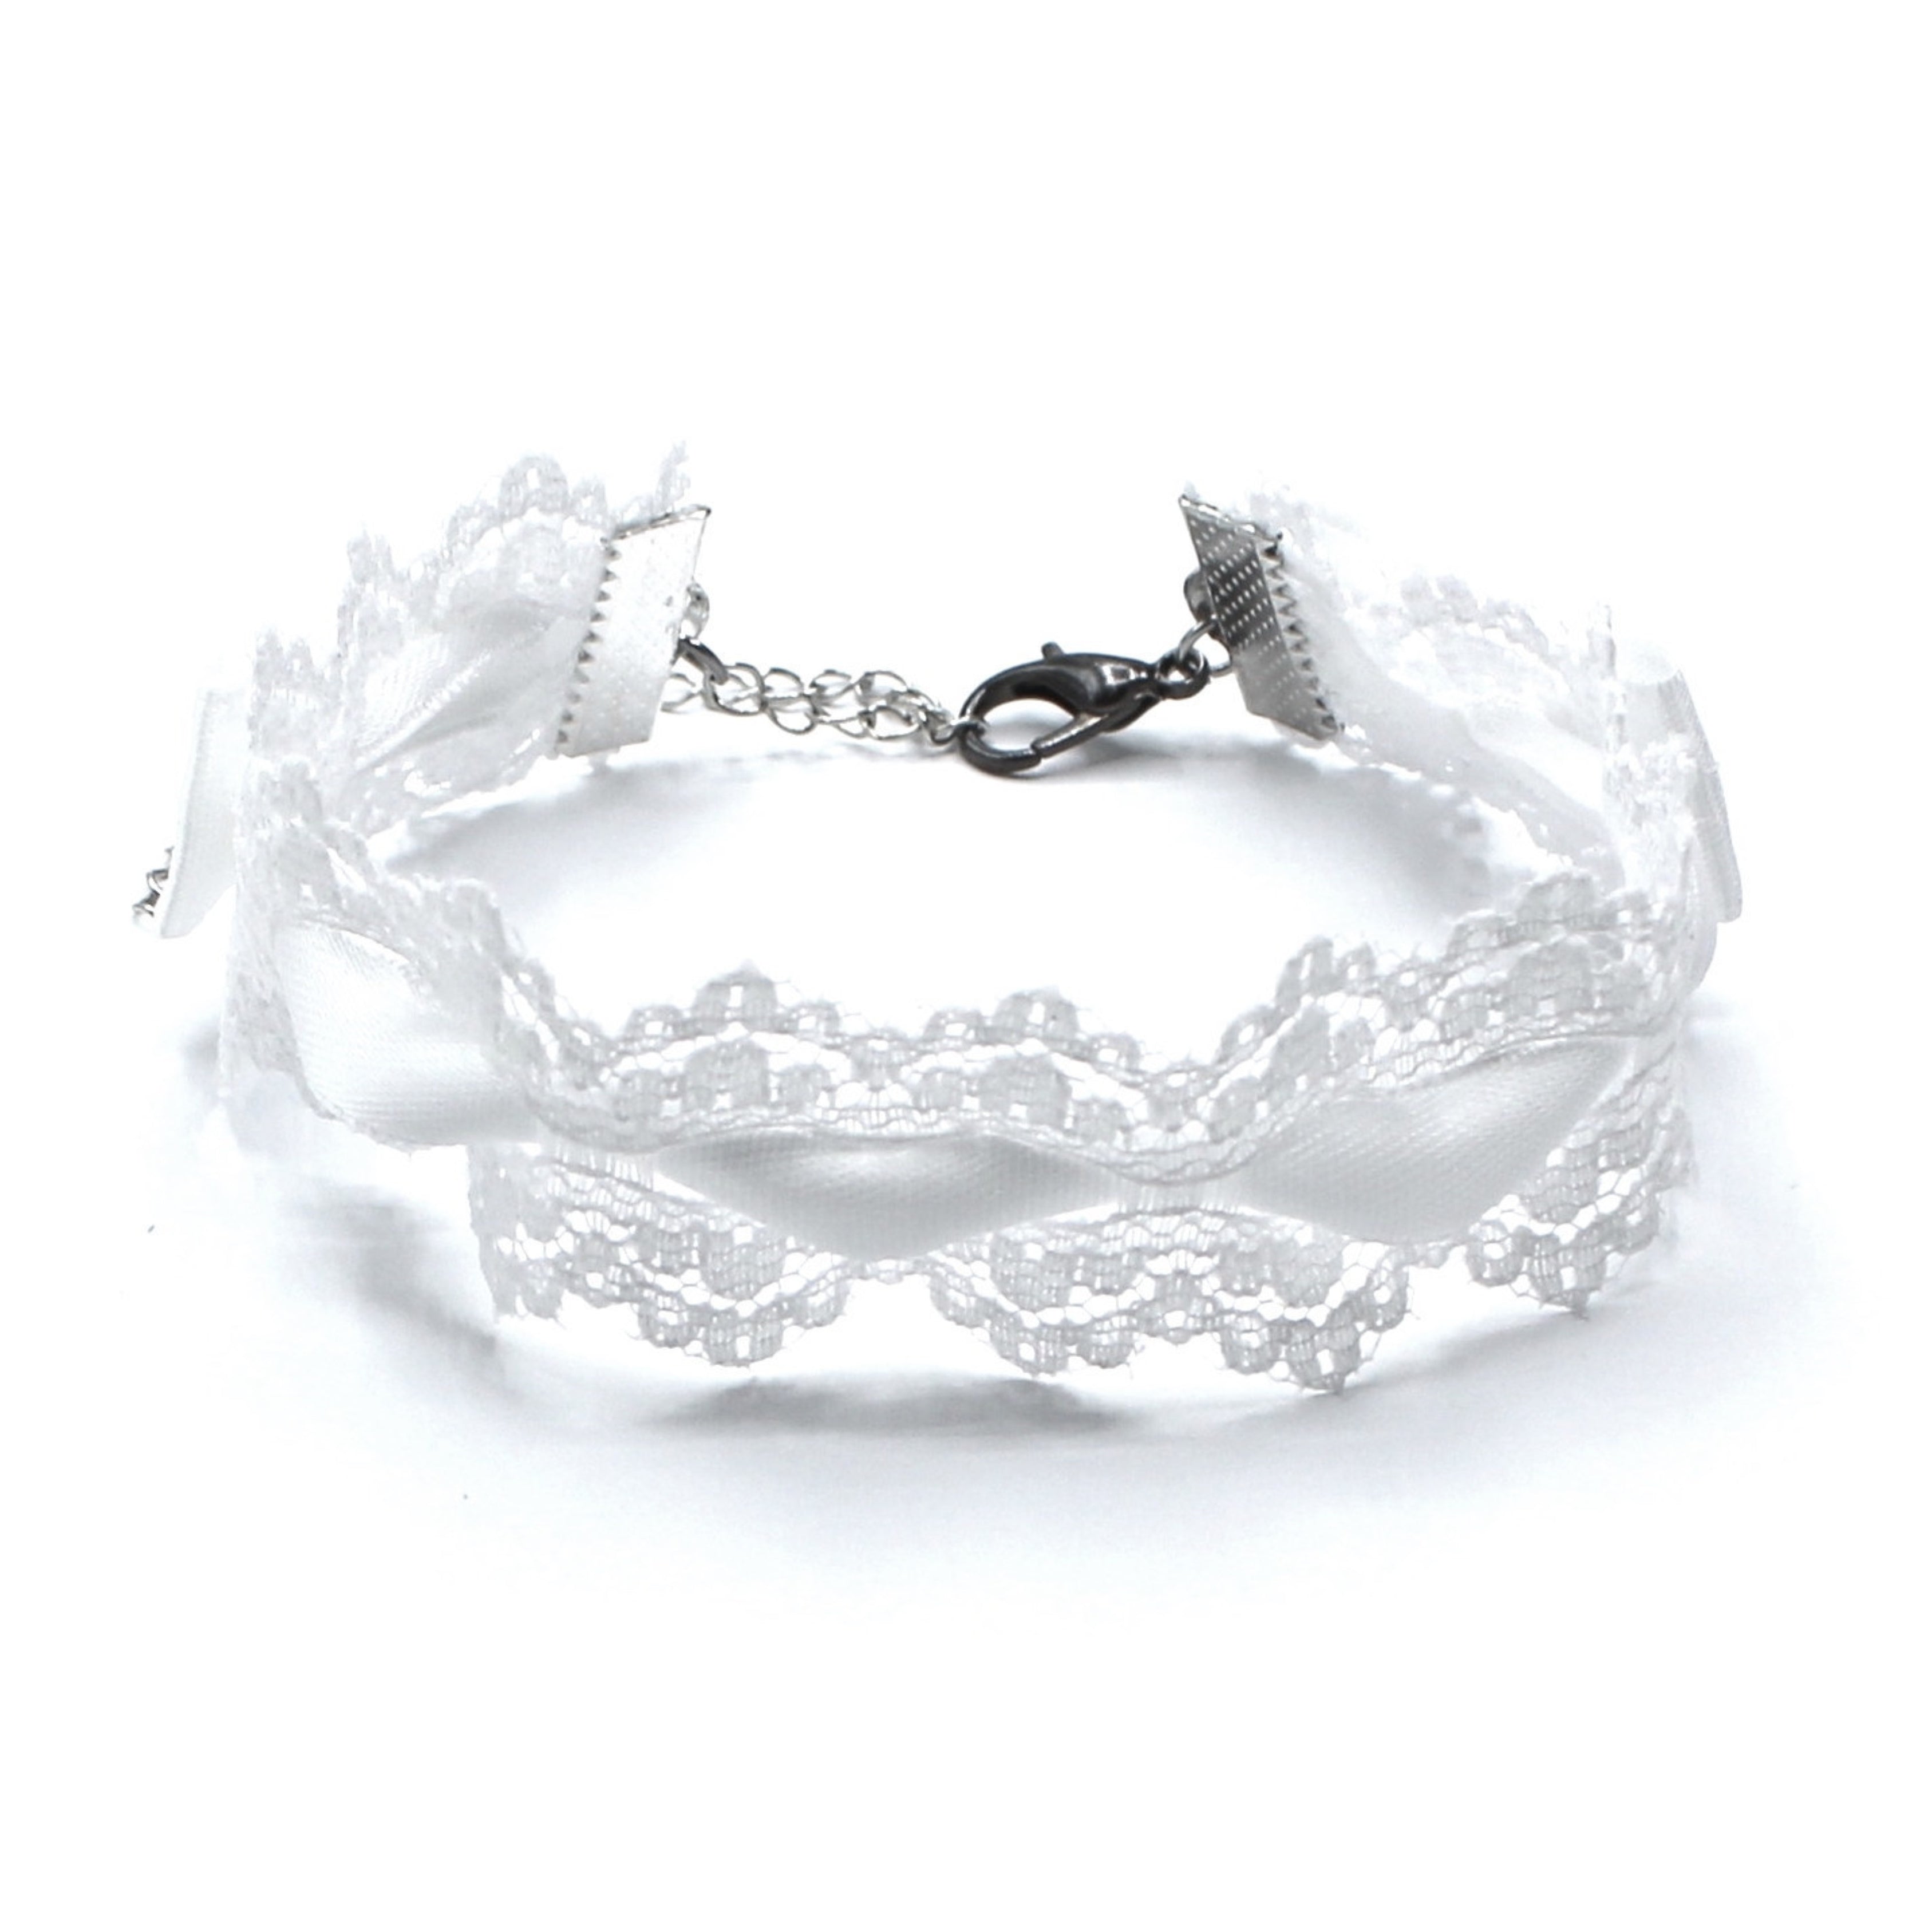 Lace White Anklet with Satin Bows